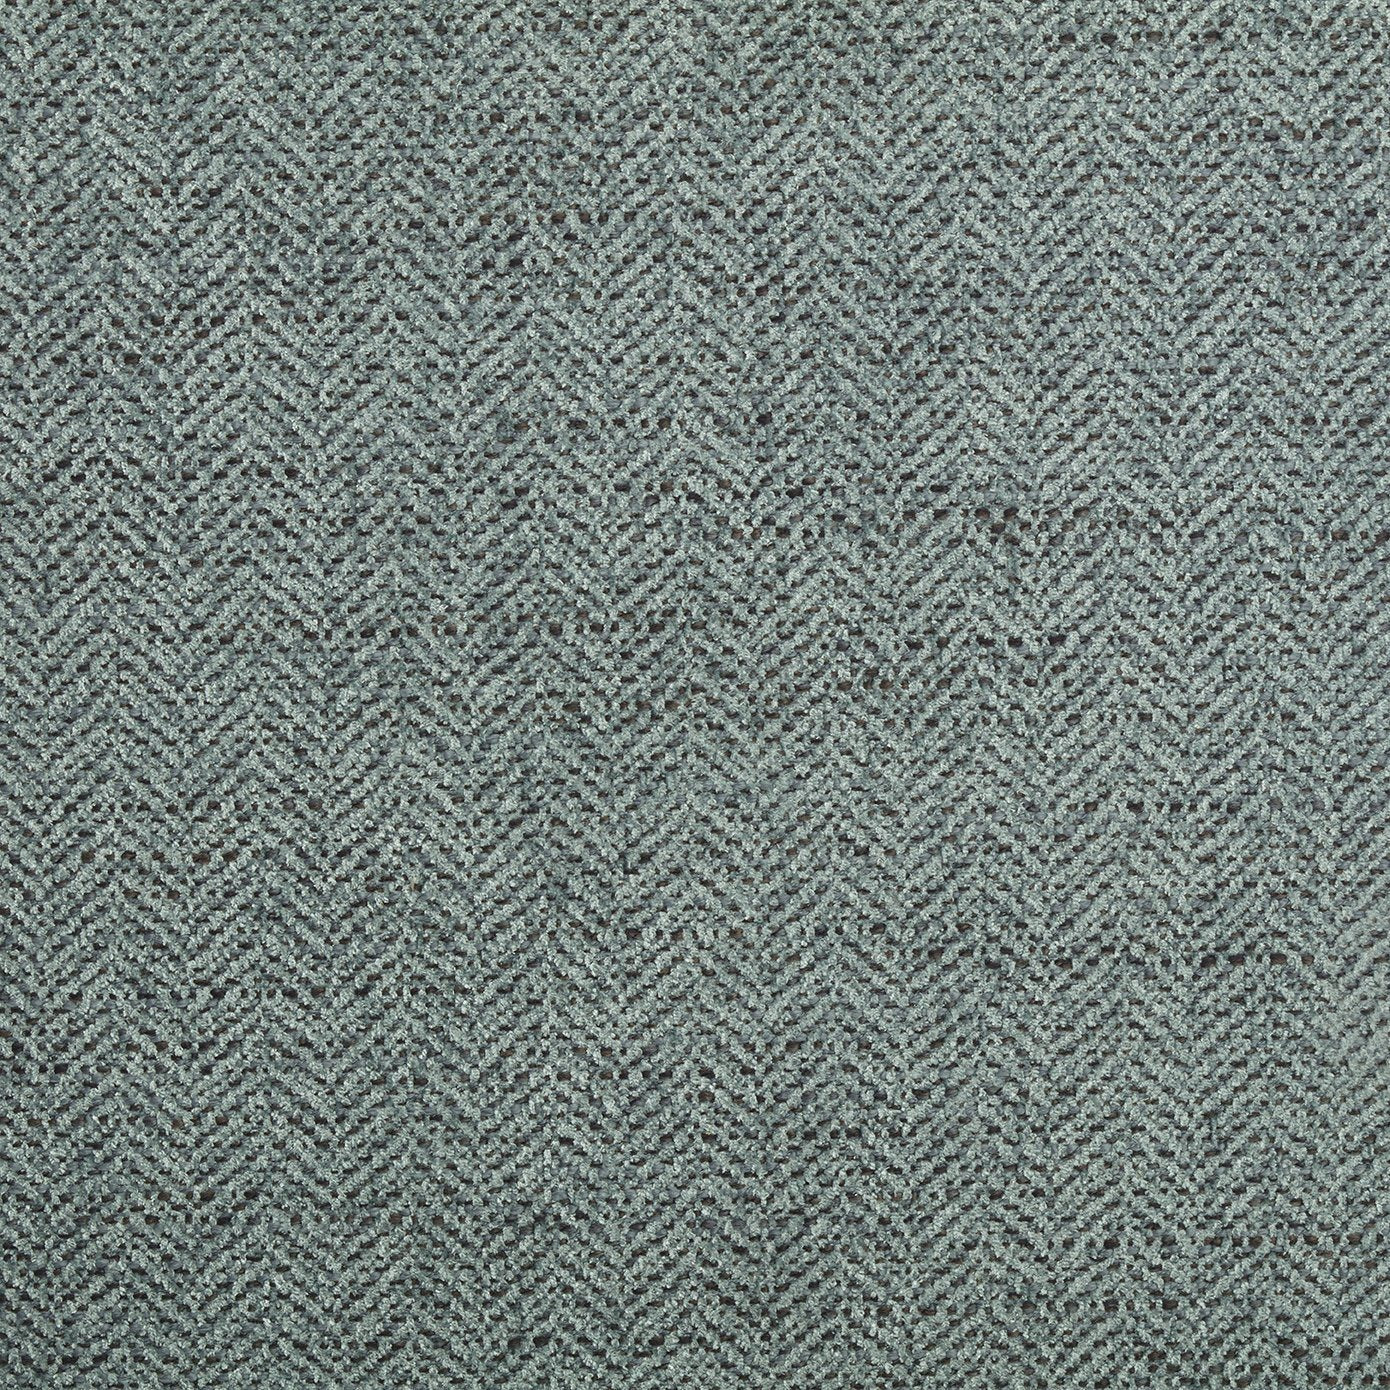 Noto Bar Chair Real Teal Counter Fabric Swatch